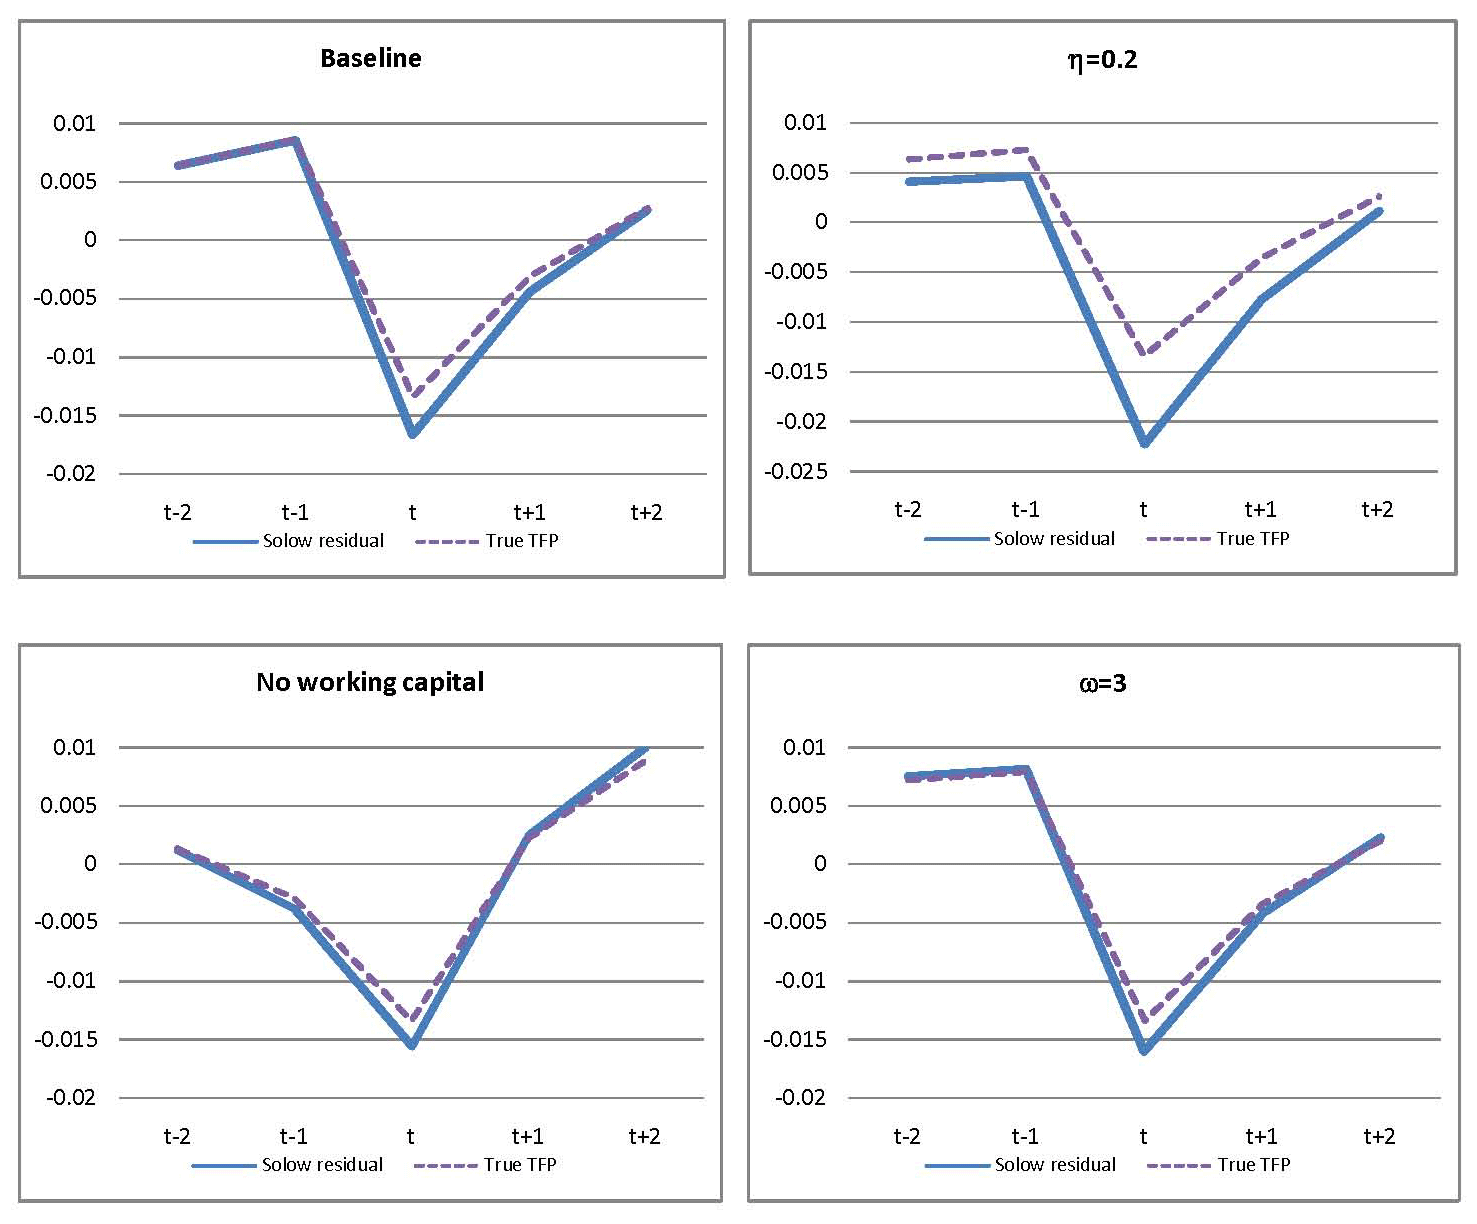 Figure 3 shows four panels that illustrate the dynamics of Solow residuals and true TFP around Sudden Stop events. The panels show five-year event windows, and each panel corresponds to a different model specification. The horizontal axis of each panel shows dates from t-2 to t+2 with date t corresponding to the date of the Sudden Stop events. The vertical axis of each panel shows percent deviations from trend. The upper left panel plots results for the Baseline model. The upper right panel plots results for the model with the parameter eta set equal to 0.2. The bottom left panel plots results for the scenario without working capital. The bottom right panel plots the scenario with the parameter omega set equal to 3.